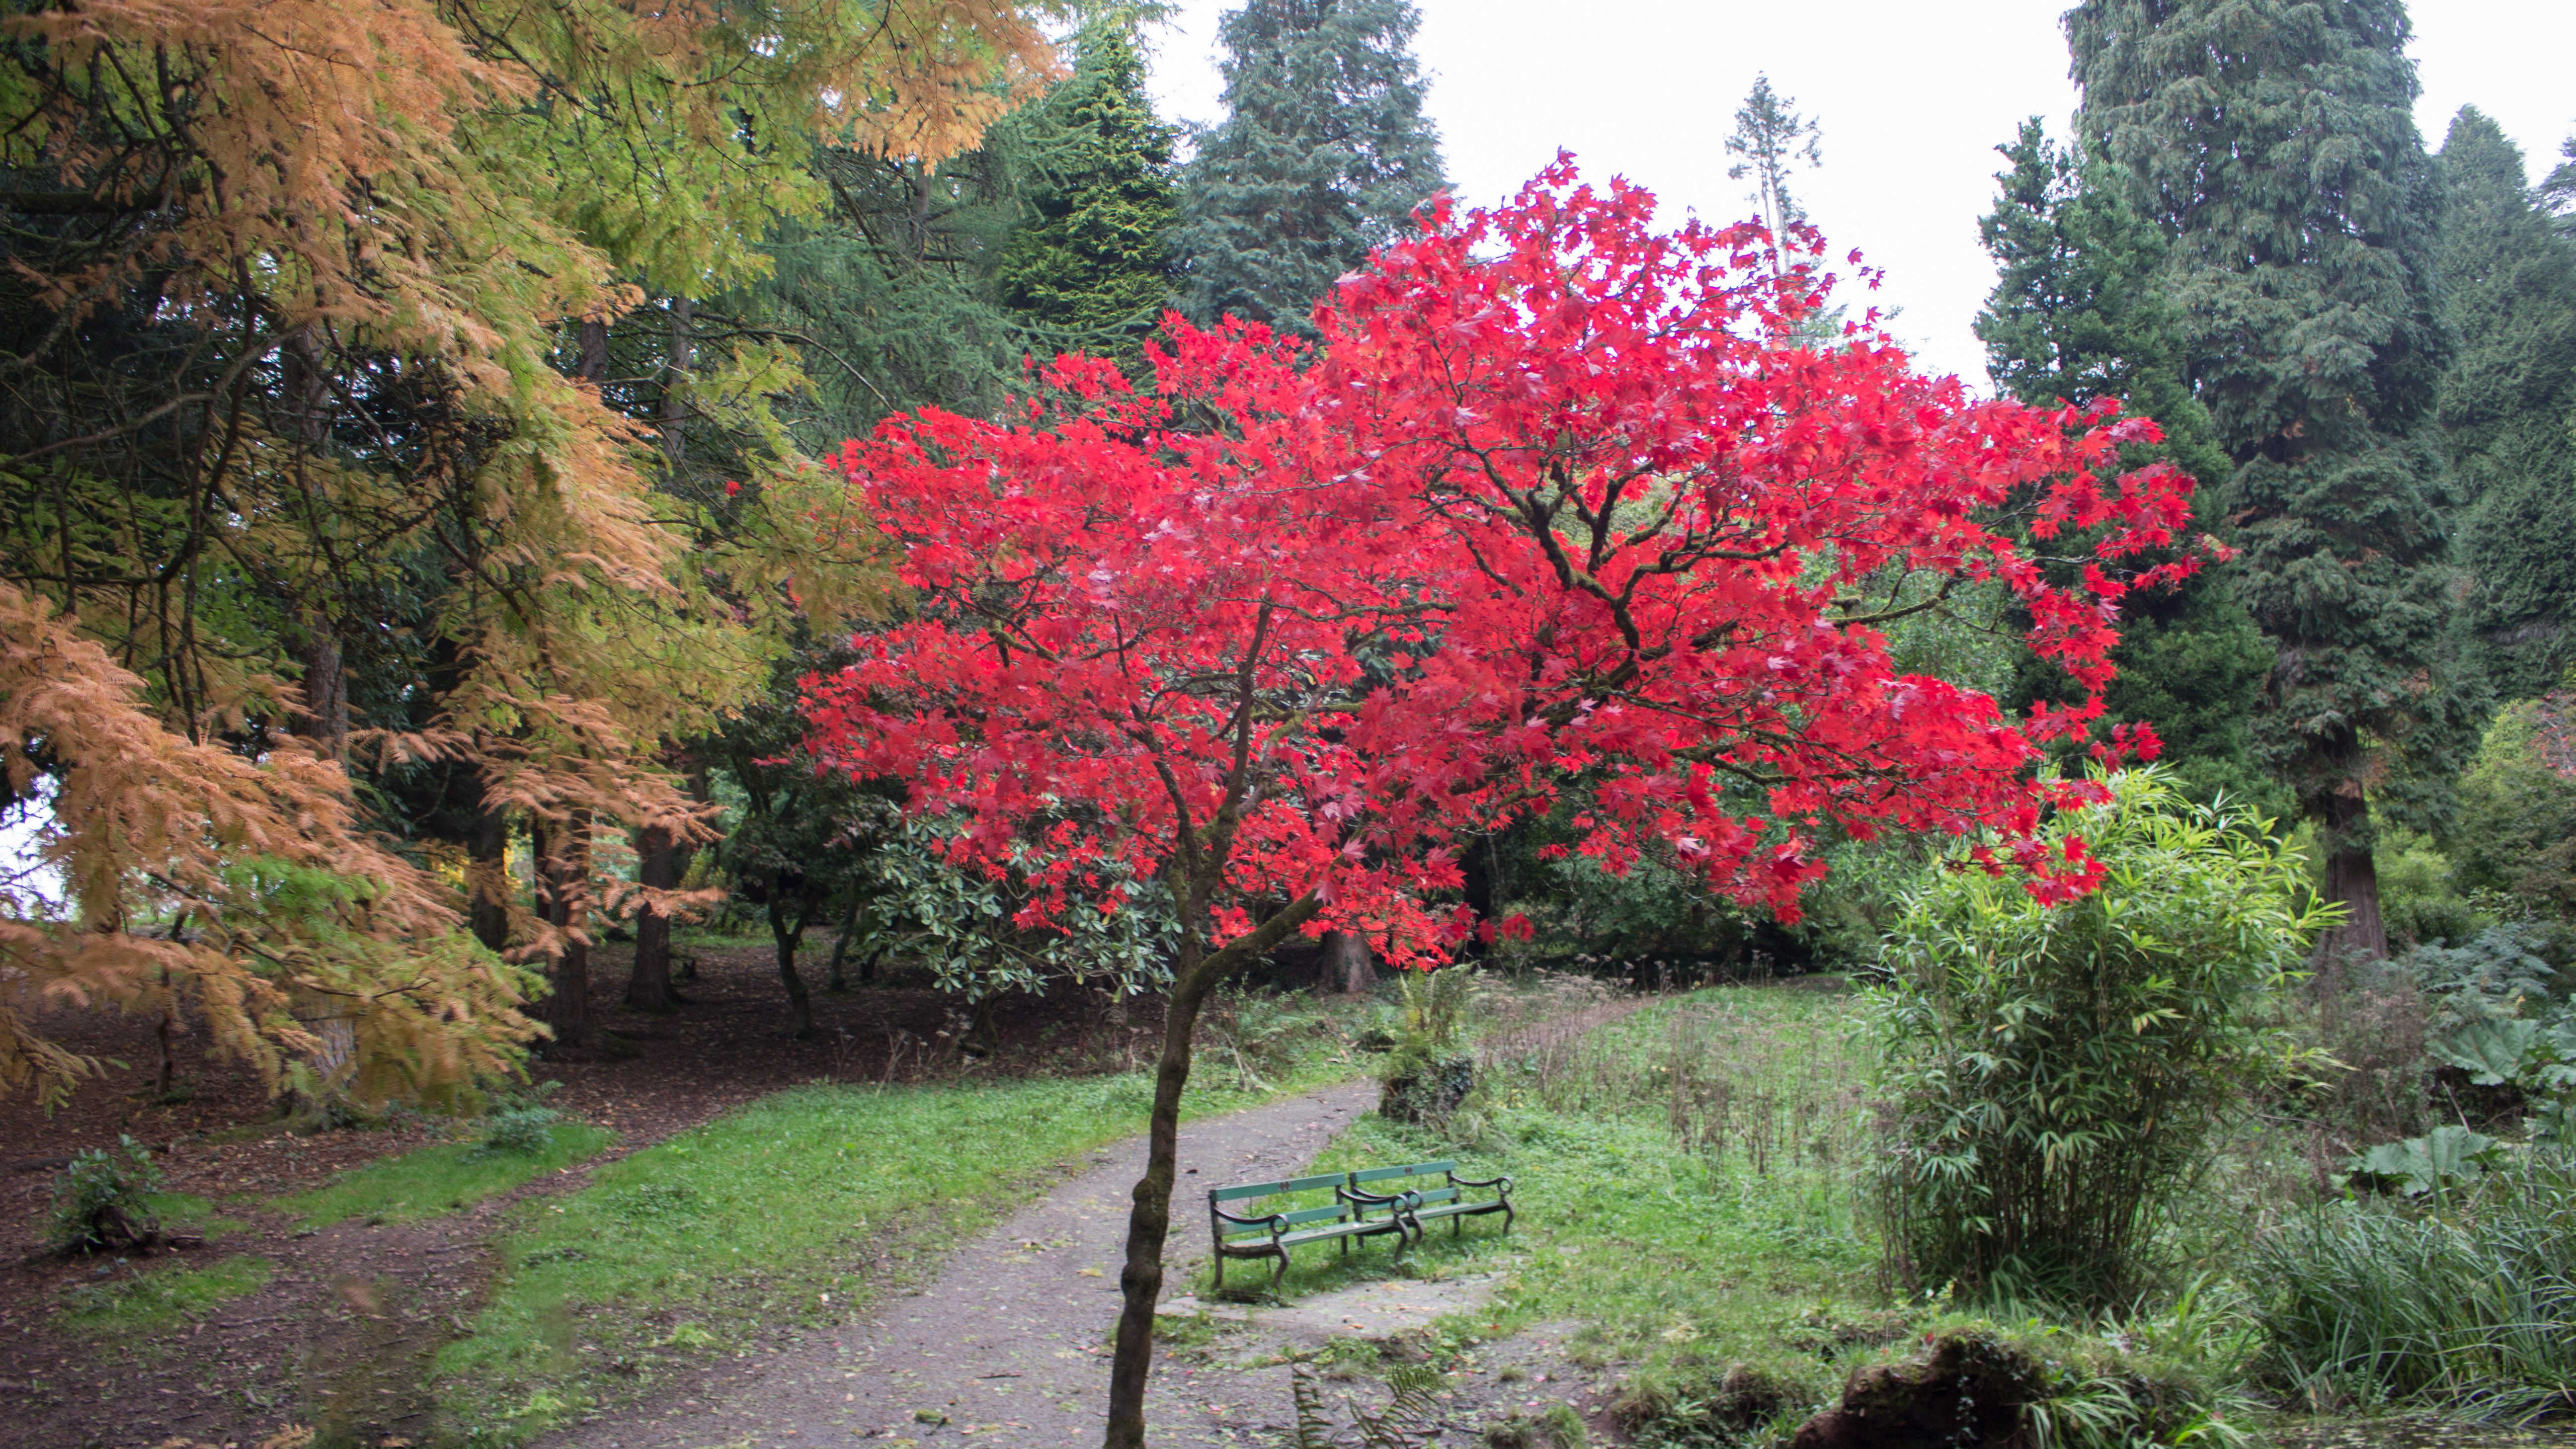 A photo of a tree with stunning red leaves, surrounded by Autumnal trees.